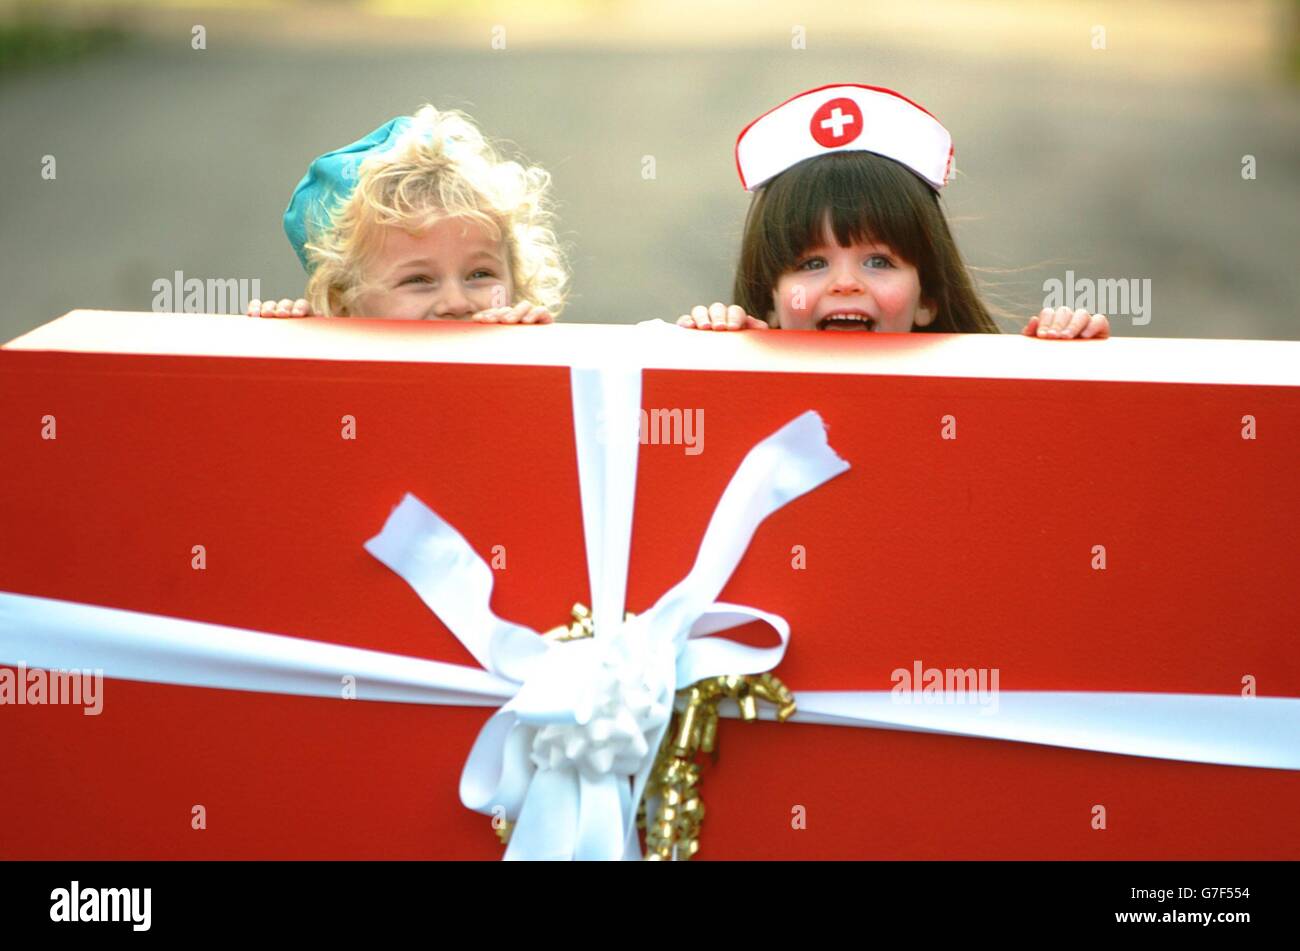 Four year olds Mark Sexton and Megan Gallagher in 'doctors' and 'nurses' costume accept a 'giant birthday gift' on behalf of the Irish Cancer Society from Musgrave SuperValu Centra of 125,000 EURO, to mark the 25th Anniversary of SuperValu and Centra stores in Ireland, St.Stephen's Green, Dublin, Ireland. Stock Photo